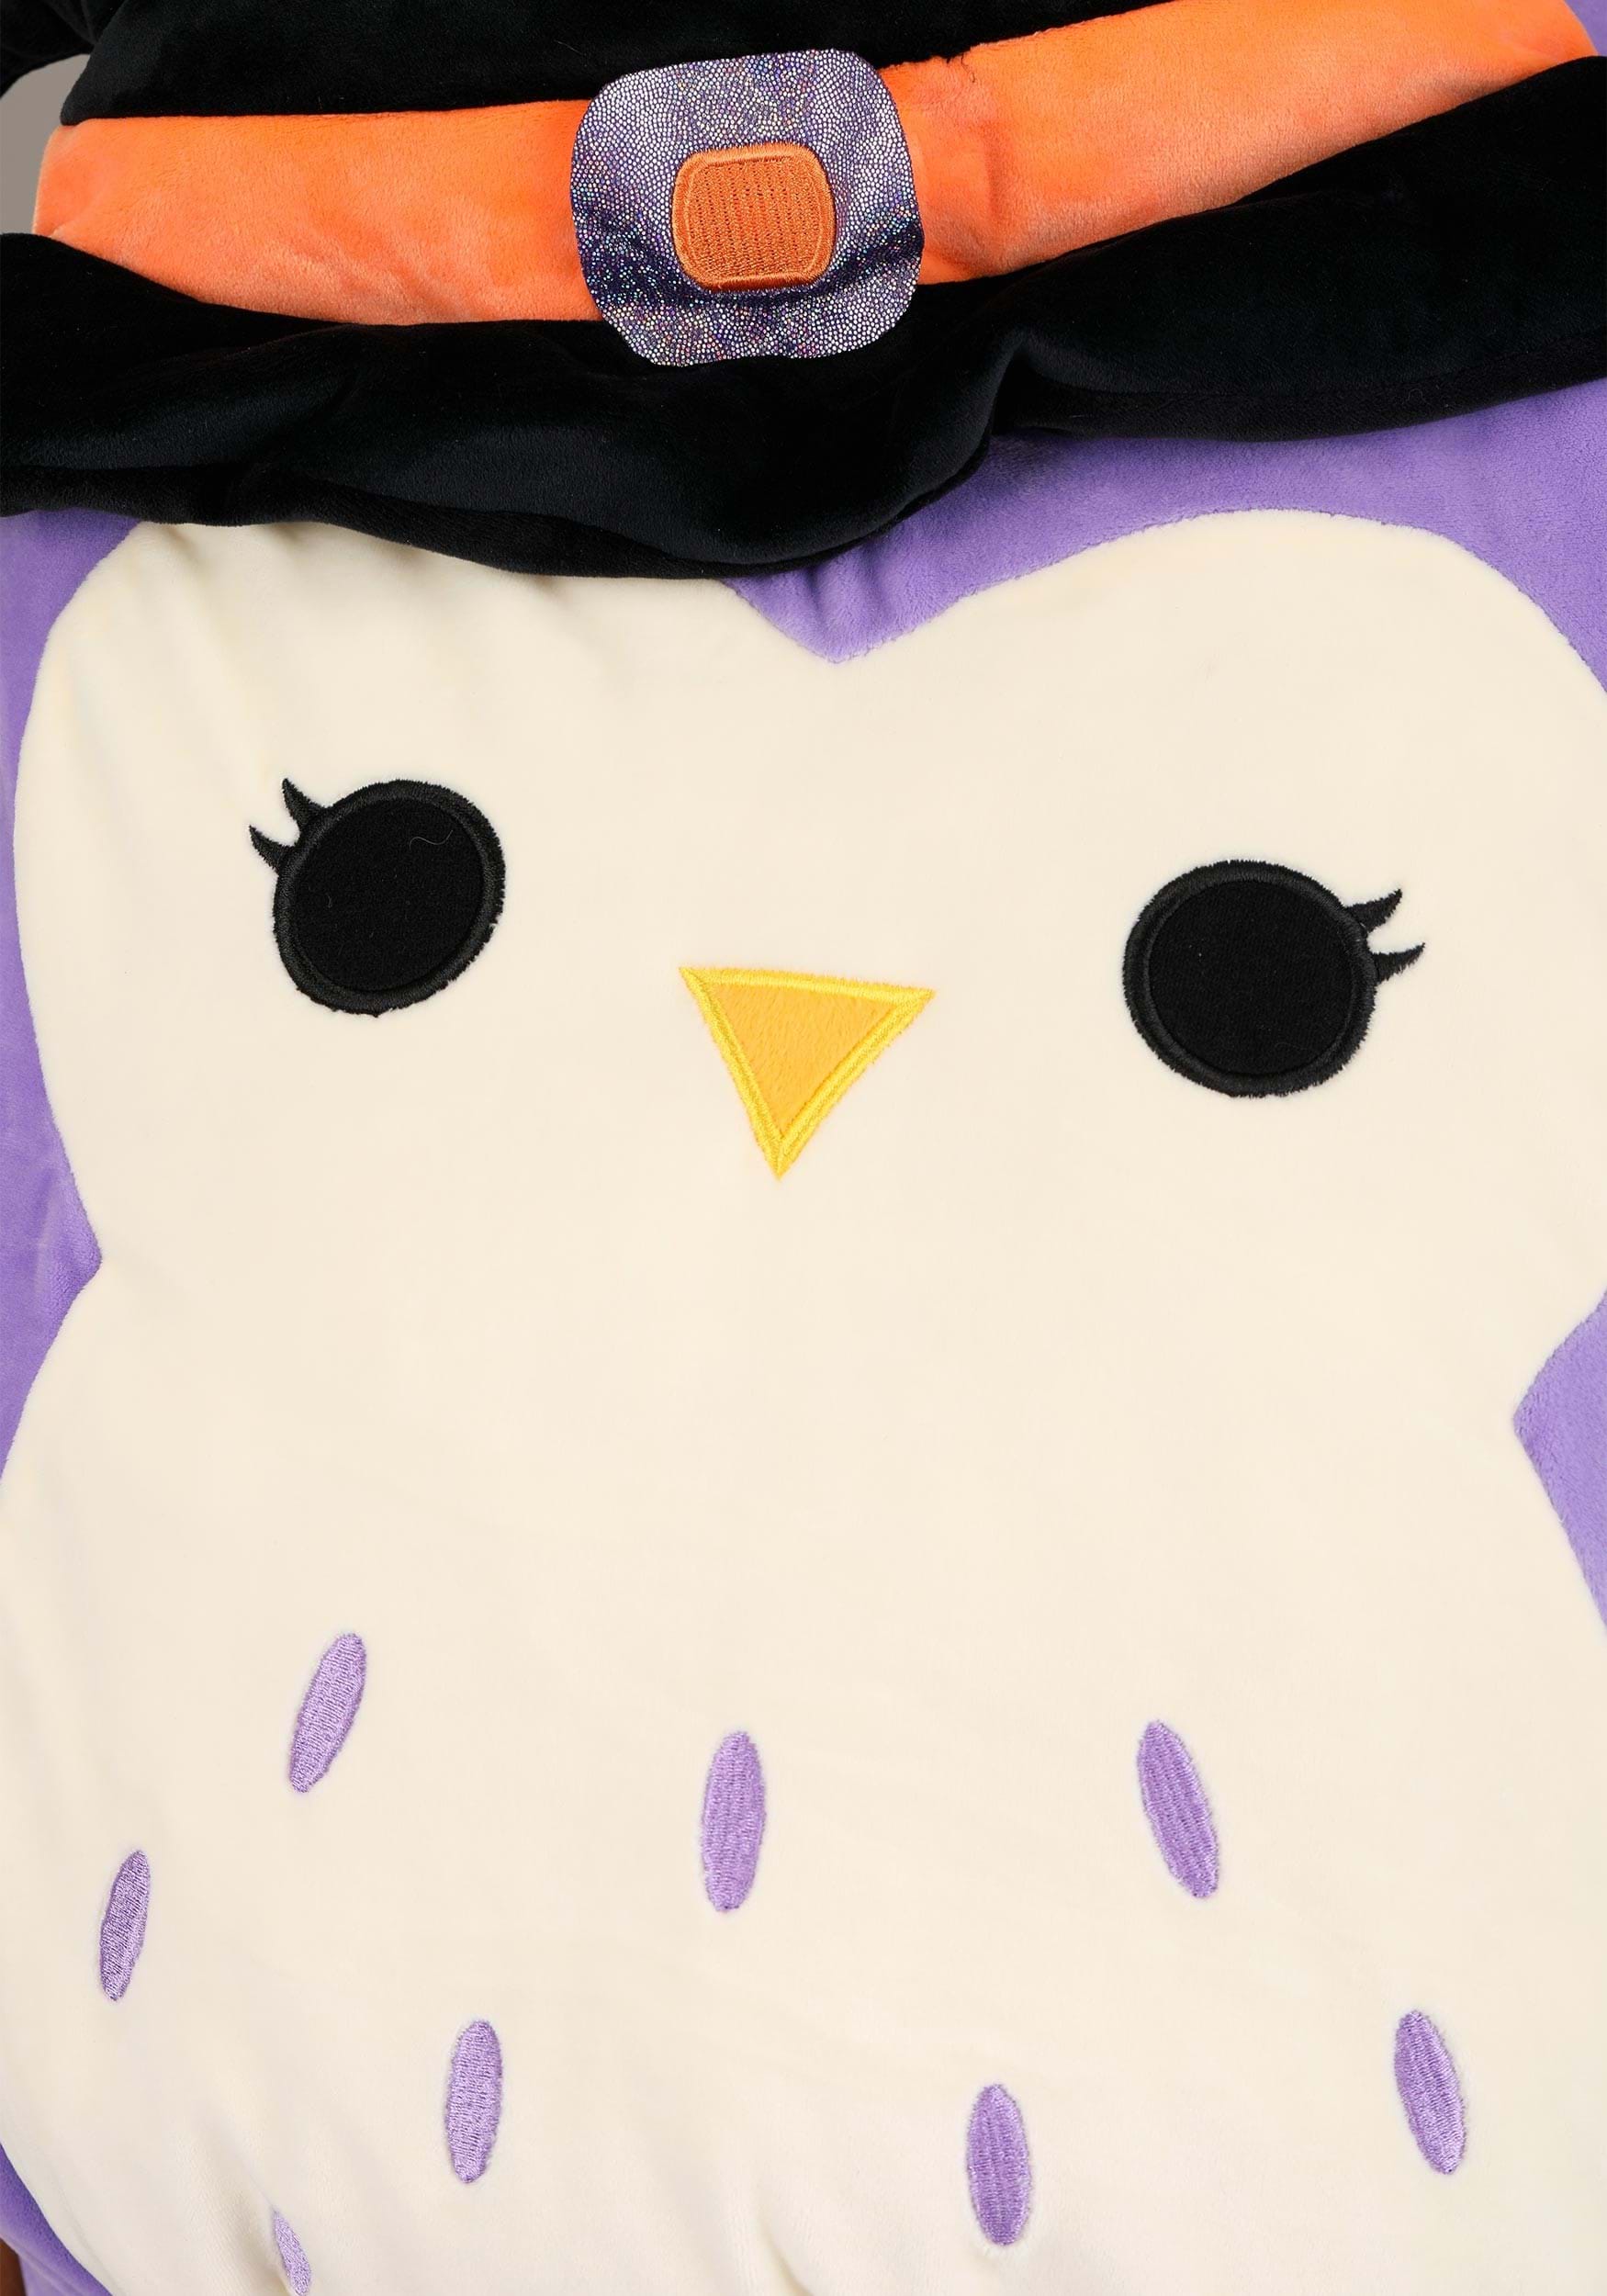 https://images.fun.com/products/86916/2-1-274965/squishmallow-holly-the-owl-costume-alt-1.jpg